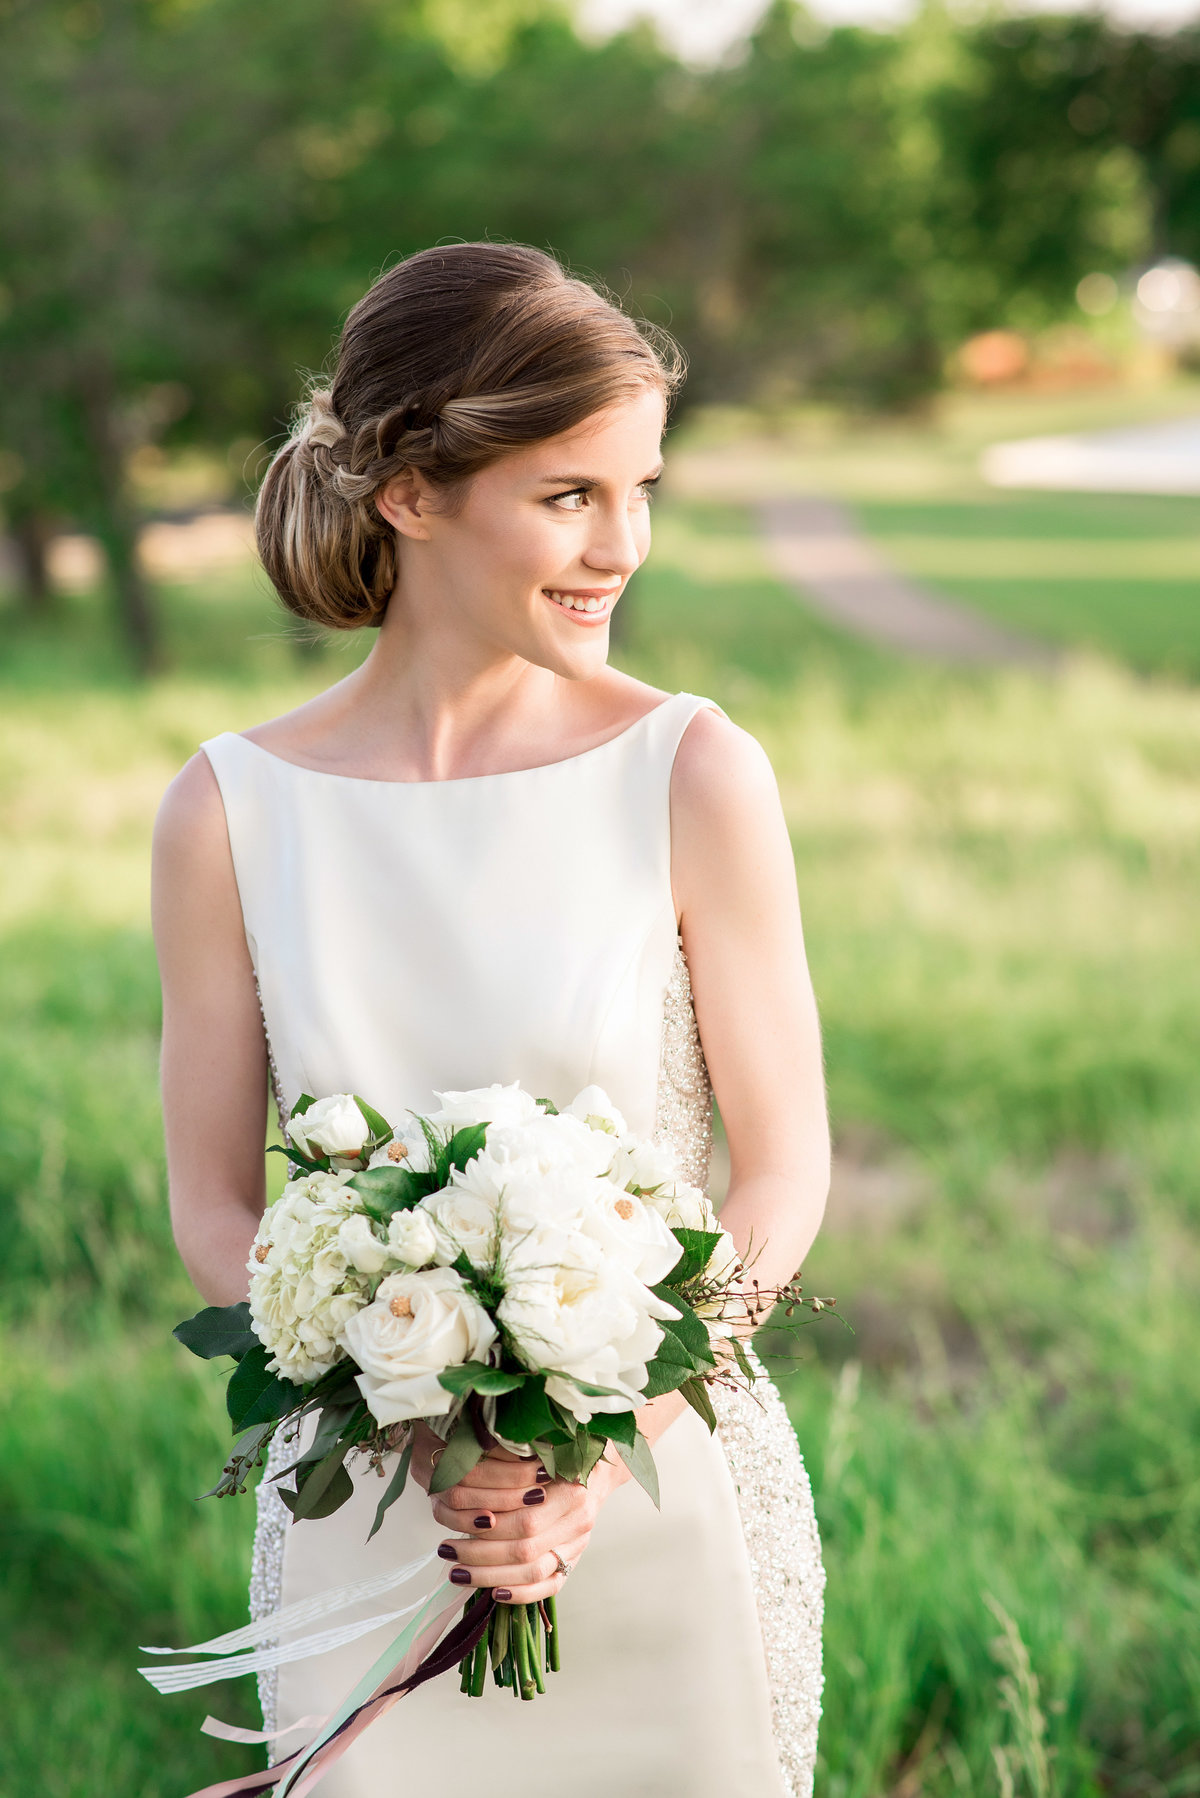 The bride stands in an overgrown green field looking off to the right. Her hair is in a low bun and she is wearing a satin sheath wedding dress with a sleeveless bateau neckline. She is holding a large round bouquet of white flowers with long white ribbons that flutter in the breeze.